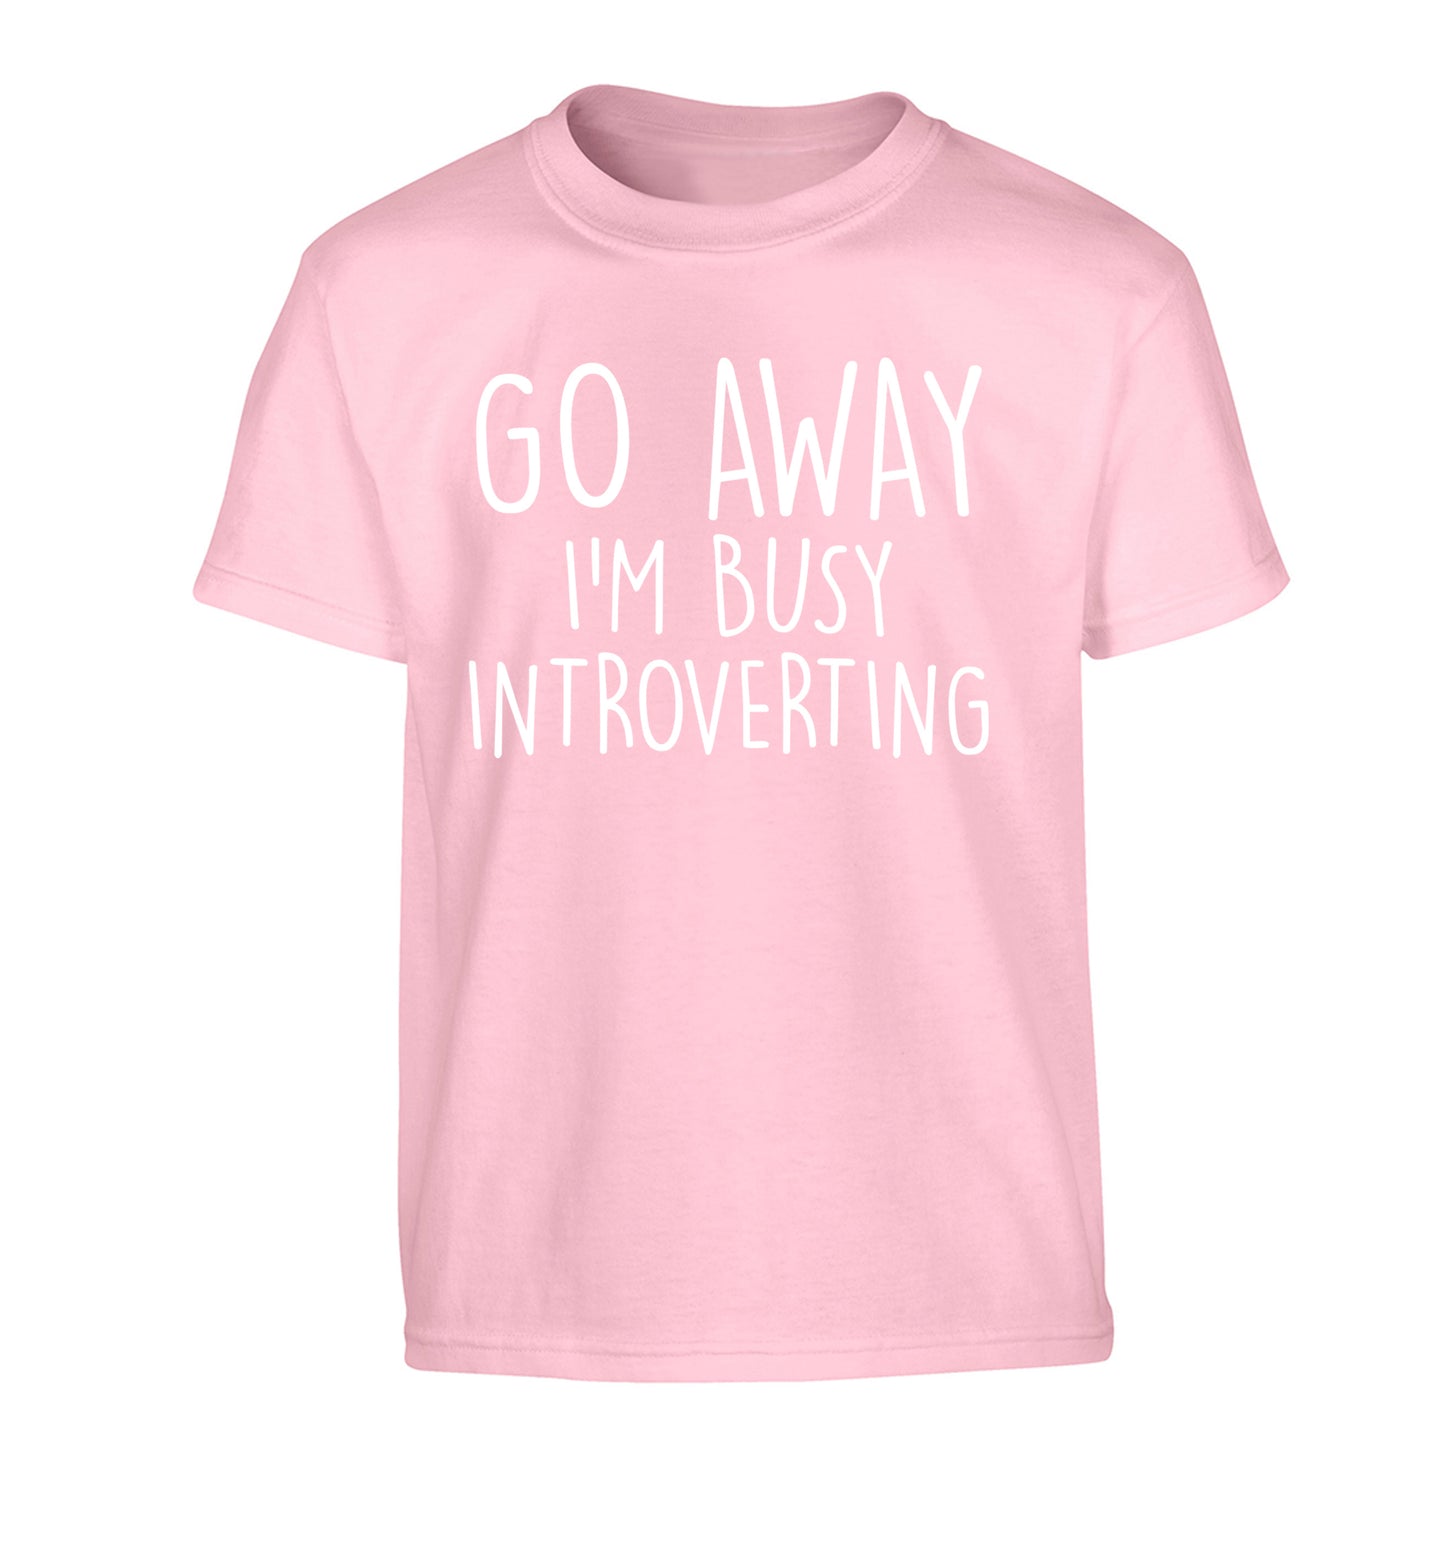 Go away I'm busy introverting Children's light pink Tshirt 12-13 Years